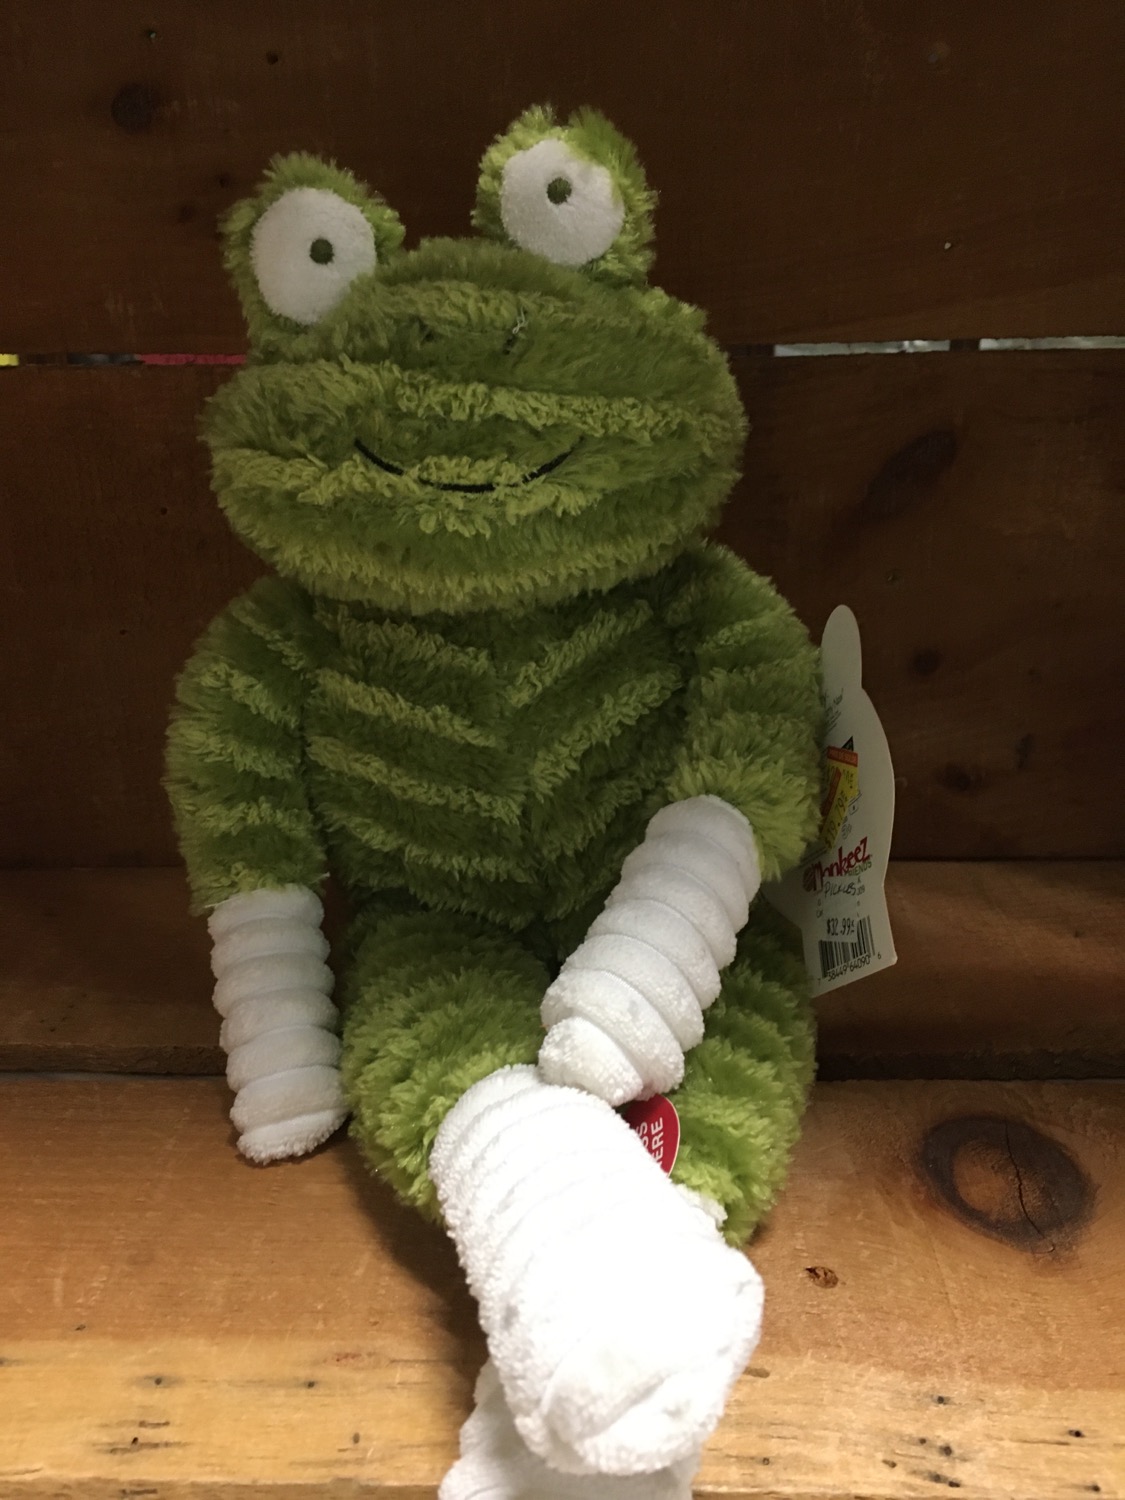 Pickles the Frog Singing Monkeez & Friends Plush Stuffed Animal -  Williamson Farms Country Store